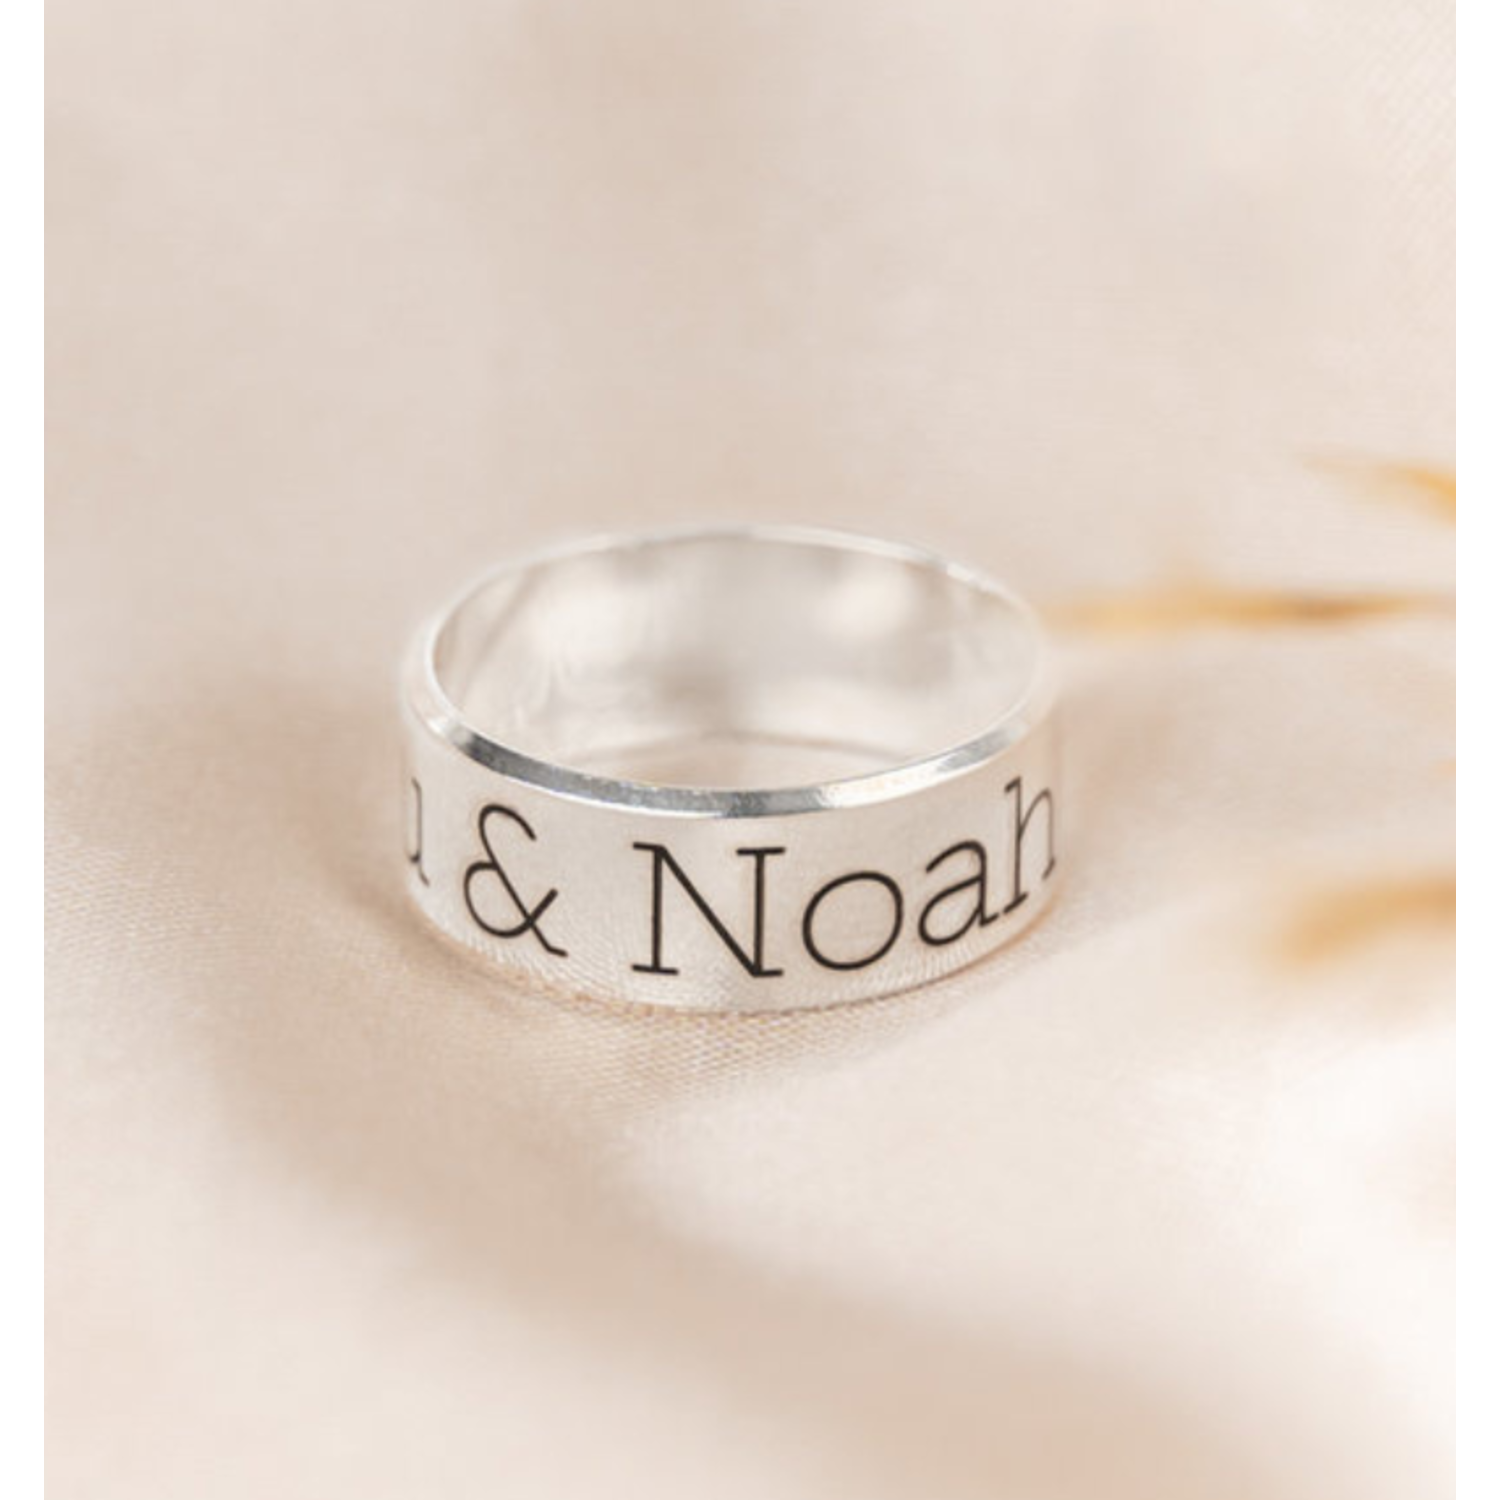 REIGN NAME RING | Personalized Jewelry | Custom Made ring – willowroe